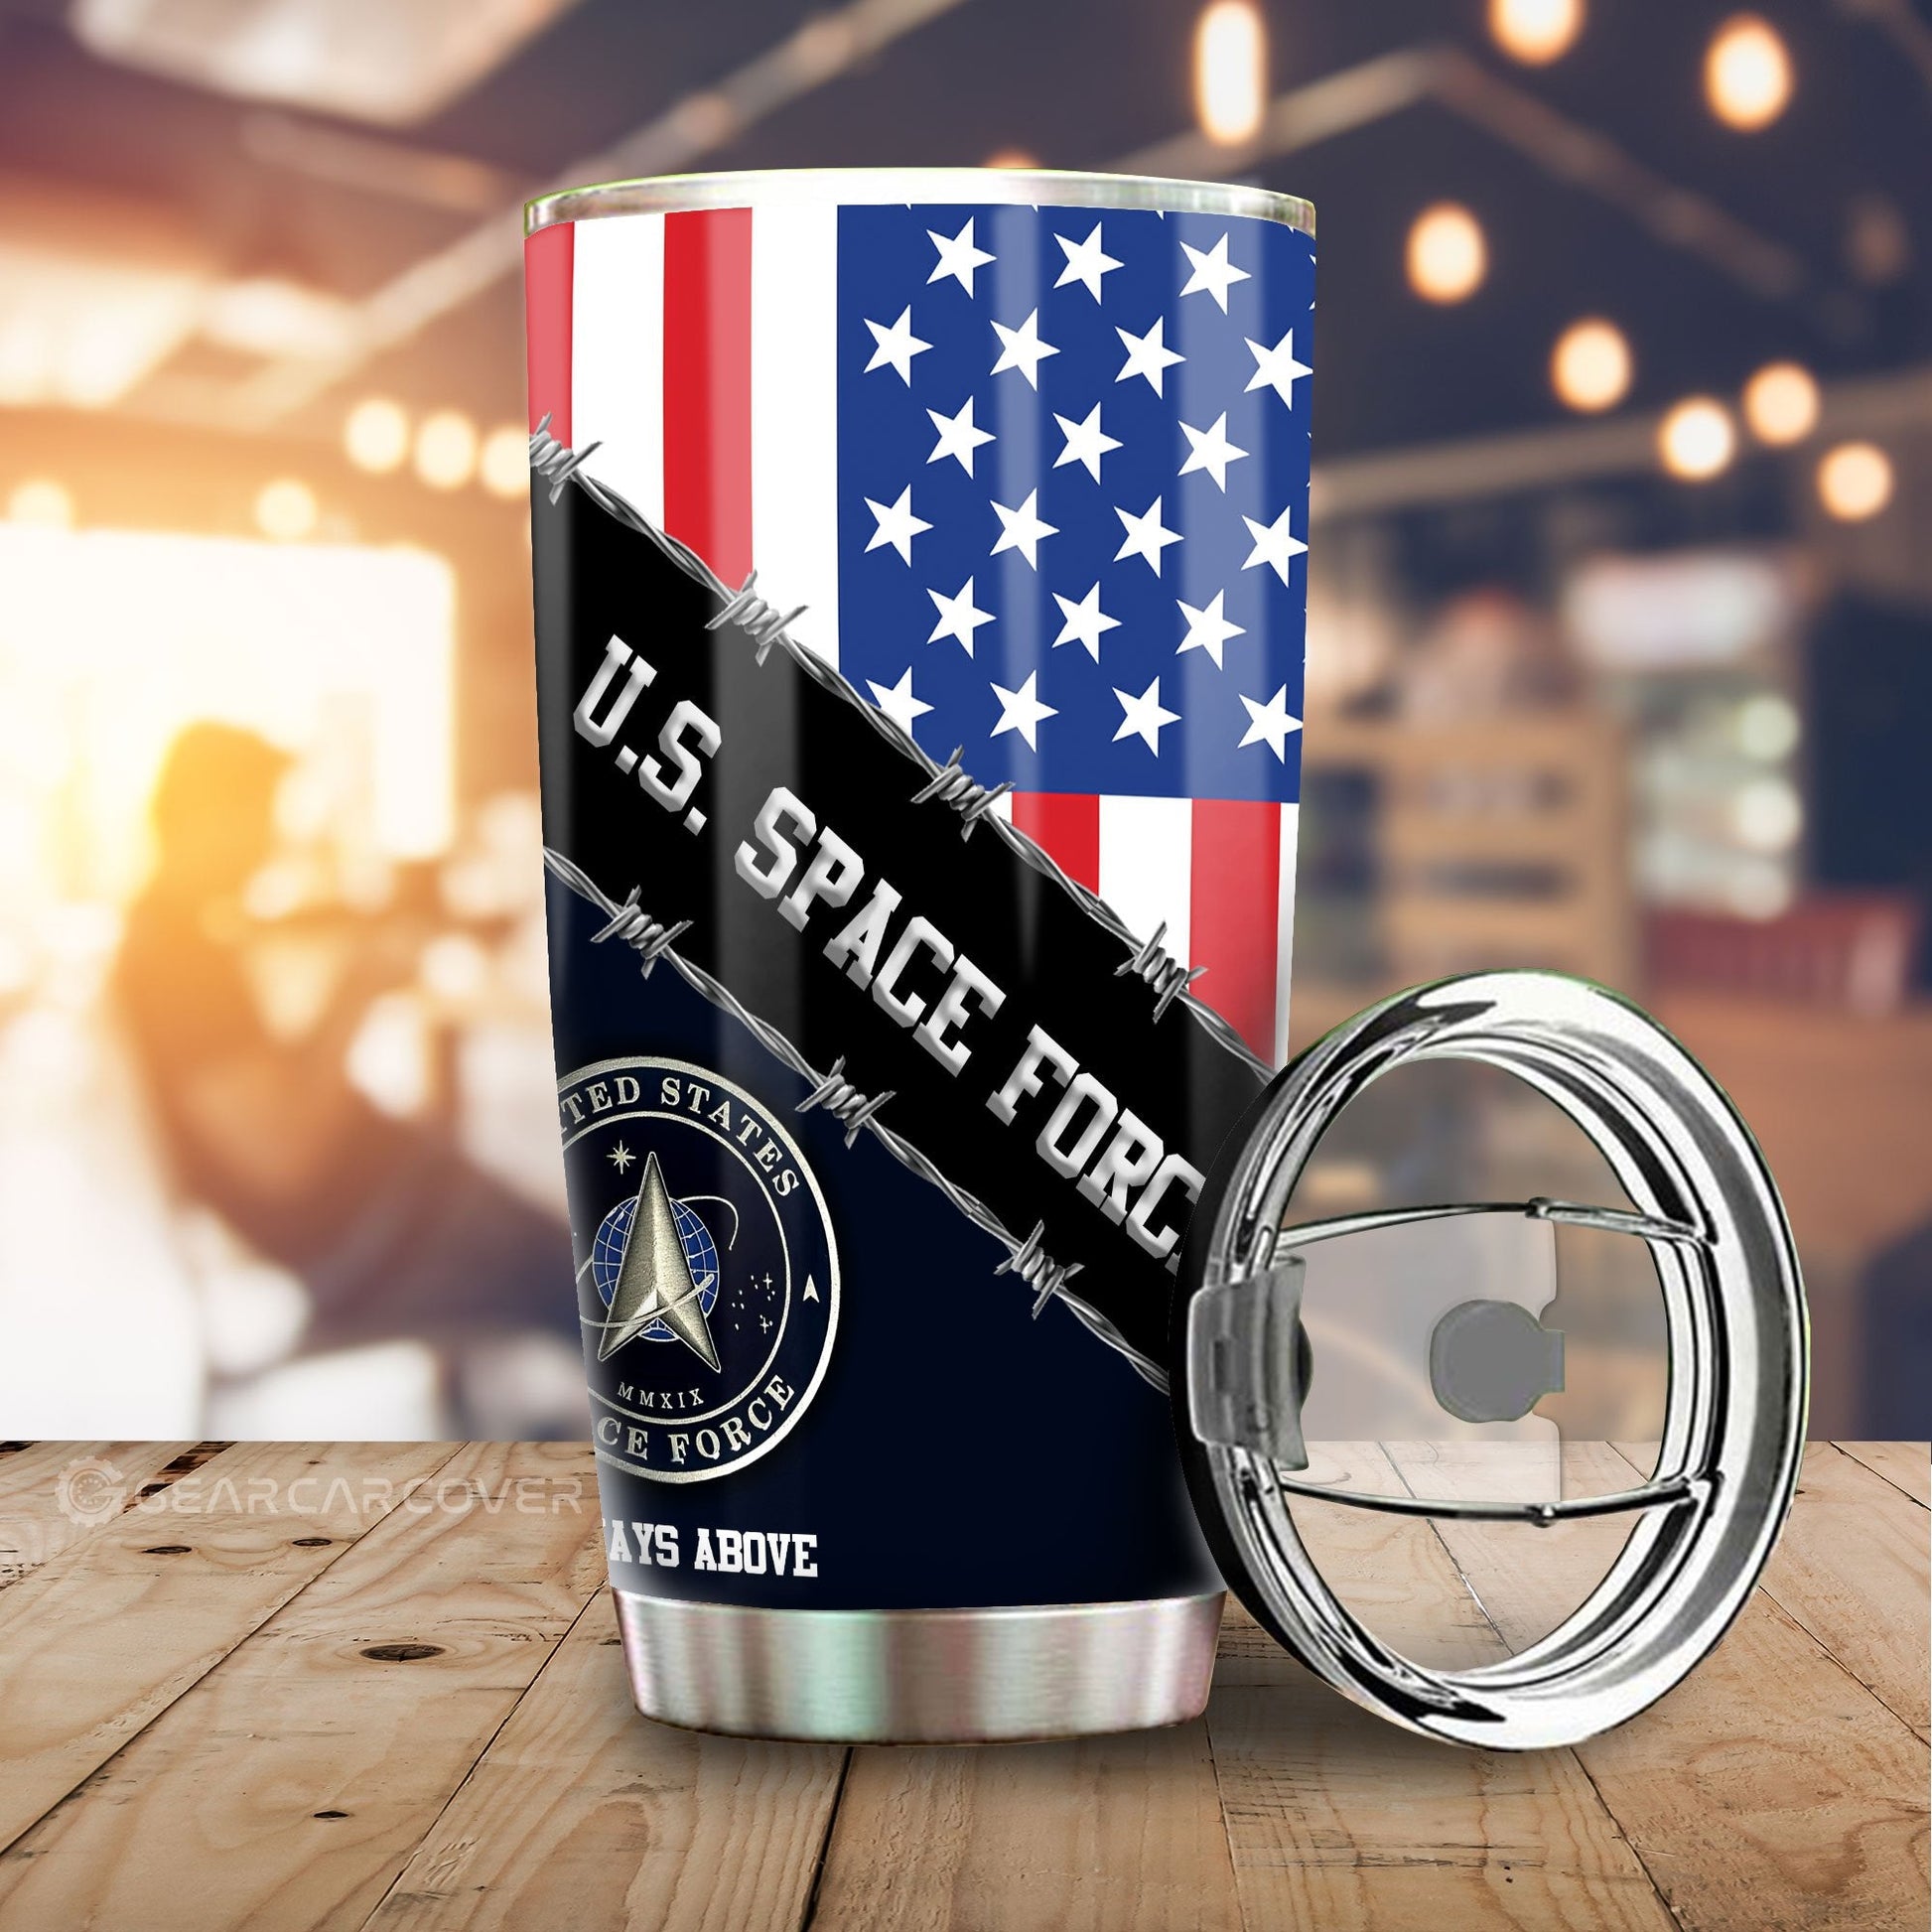 U.S. Space Force Tumbler Cup Custom United States Military Car Accessories - Gearcarcover - 1